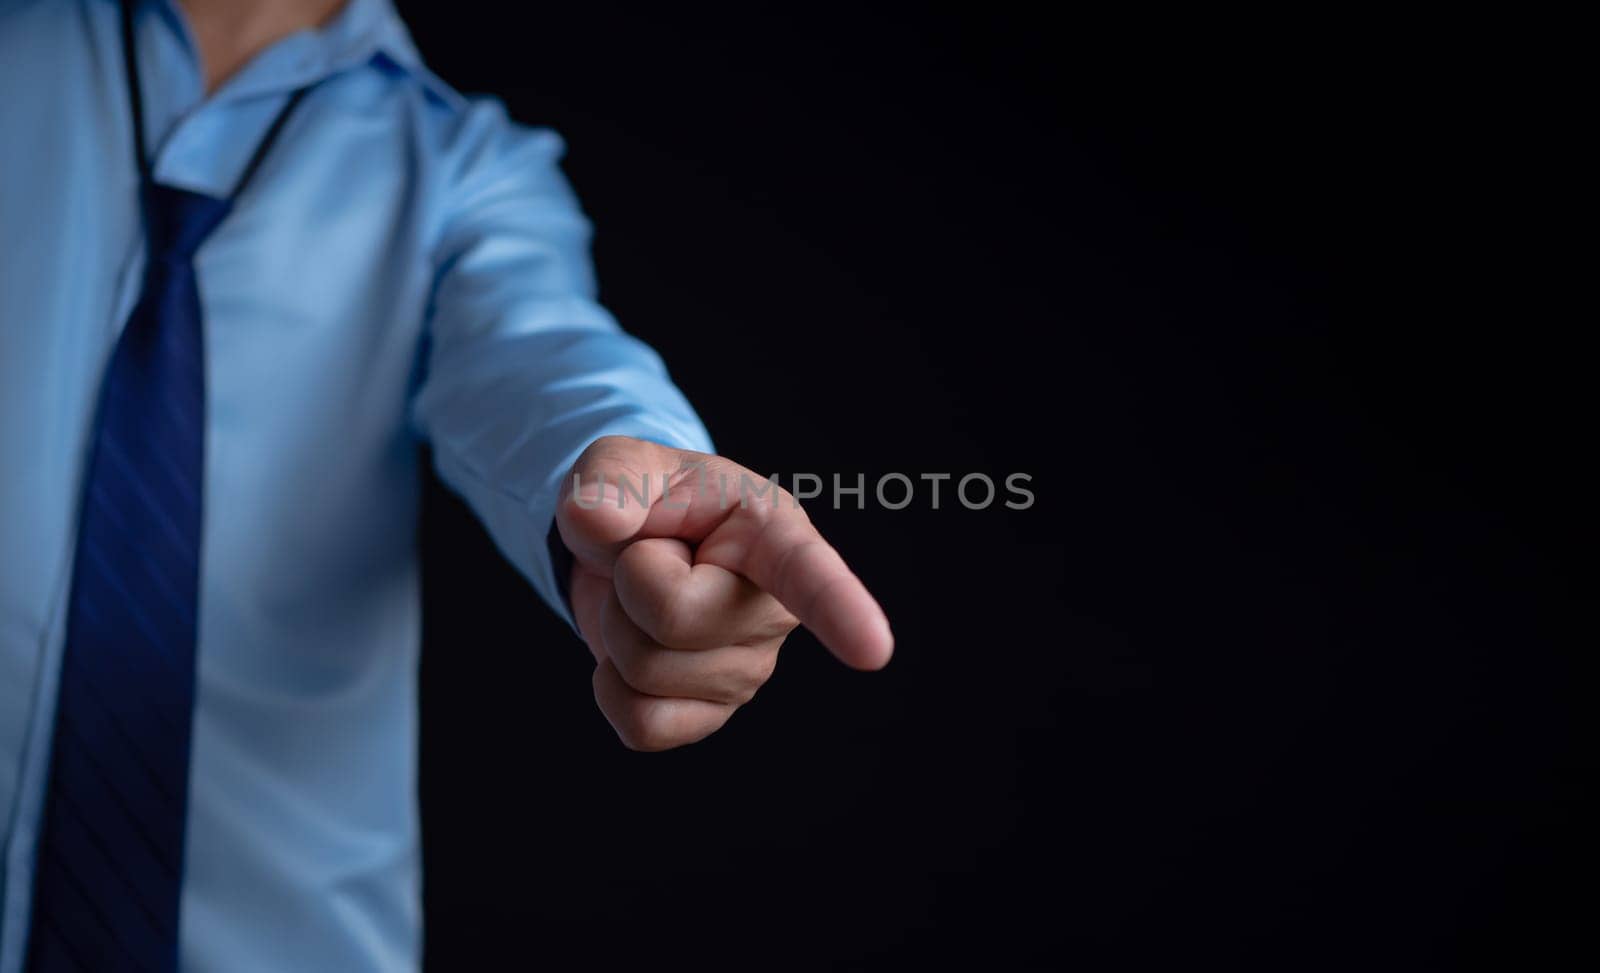 Employee makes a forward pointing gesture on a dark background. by Unimages2527